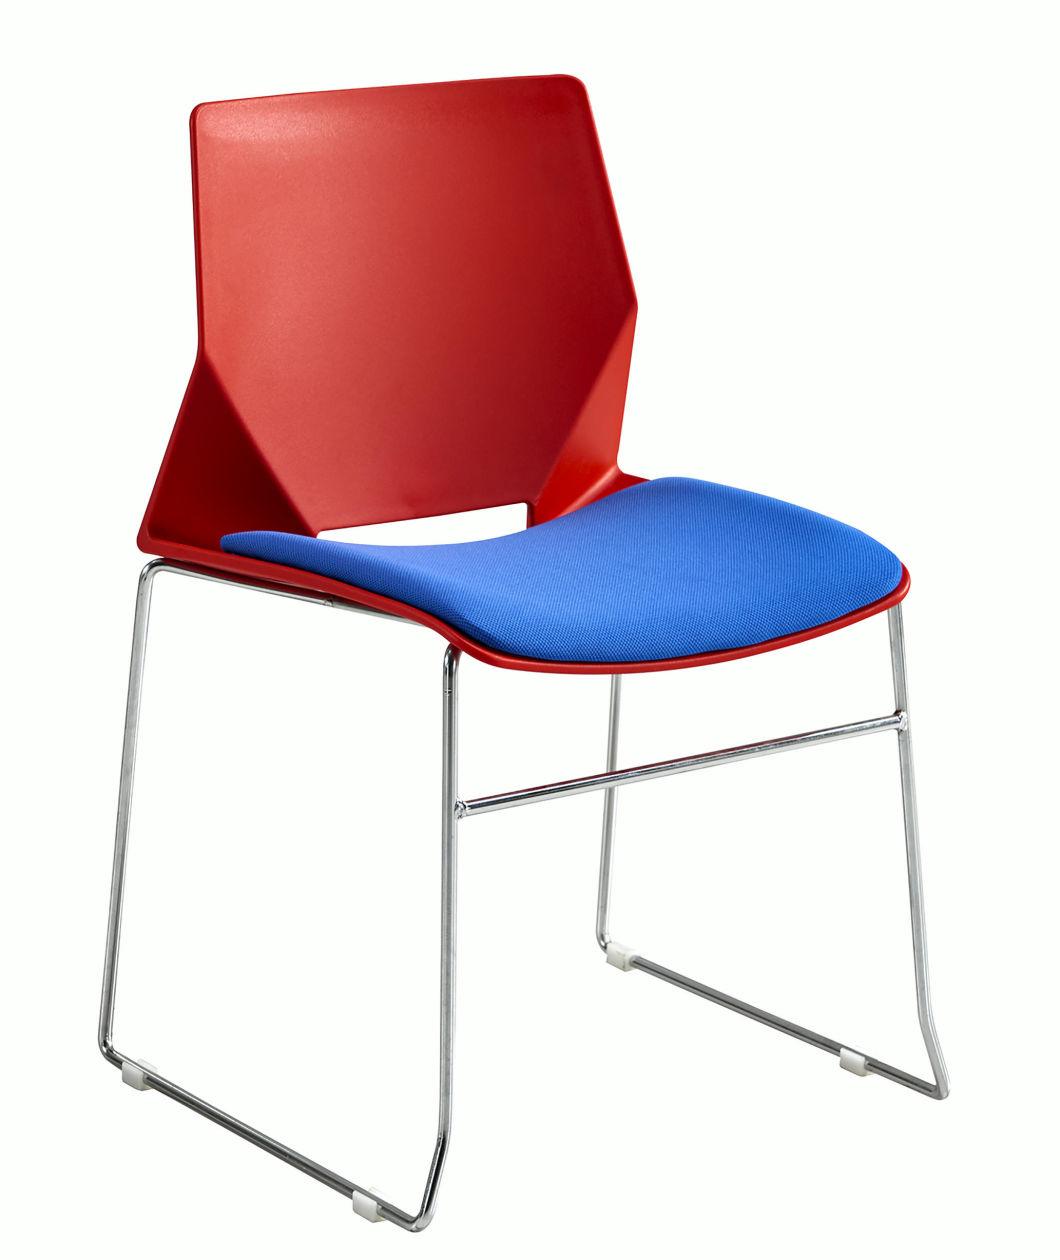 Stackable Plastic Seat Events Furniture Canteen Chair with Steel Leg